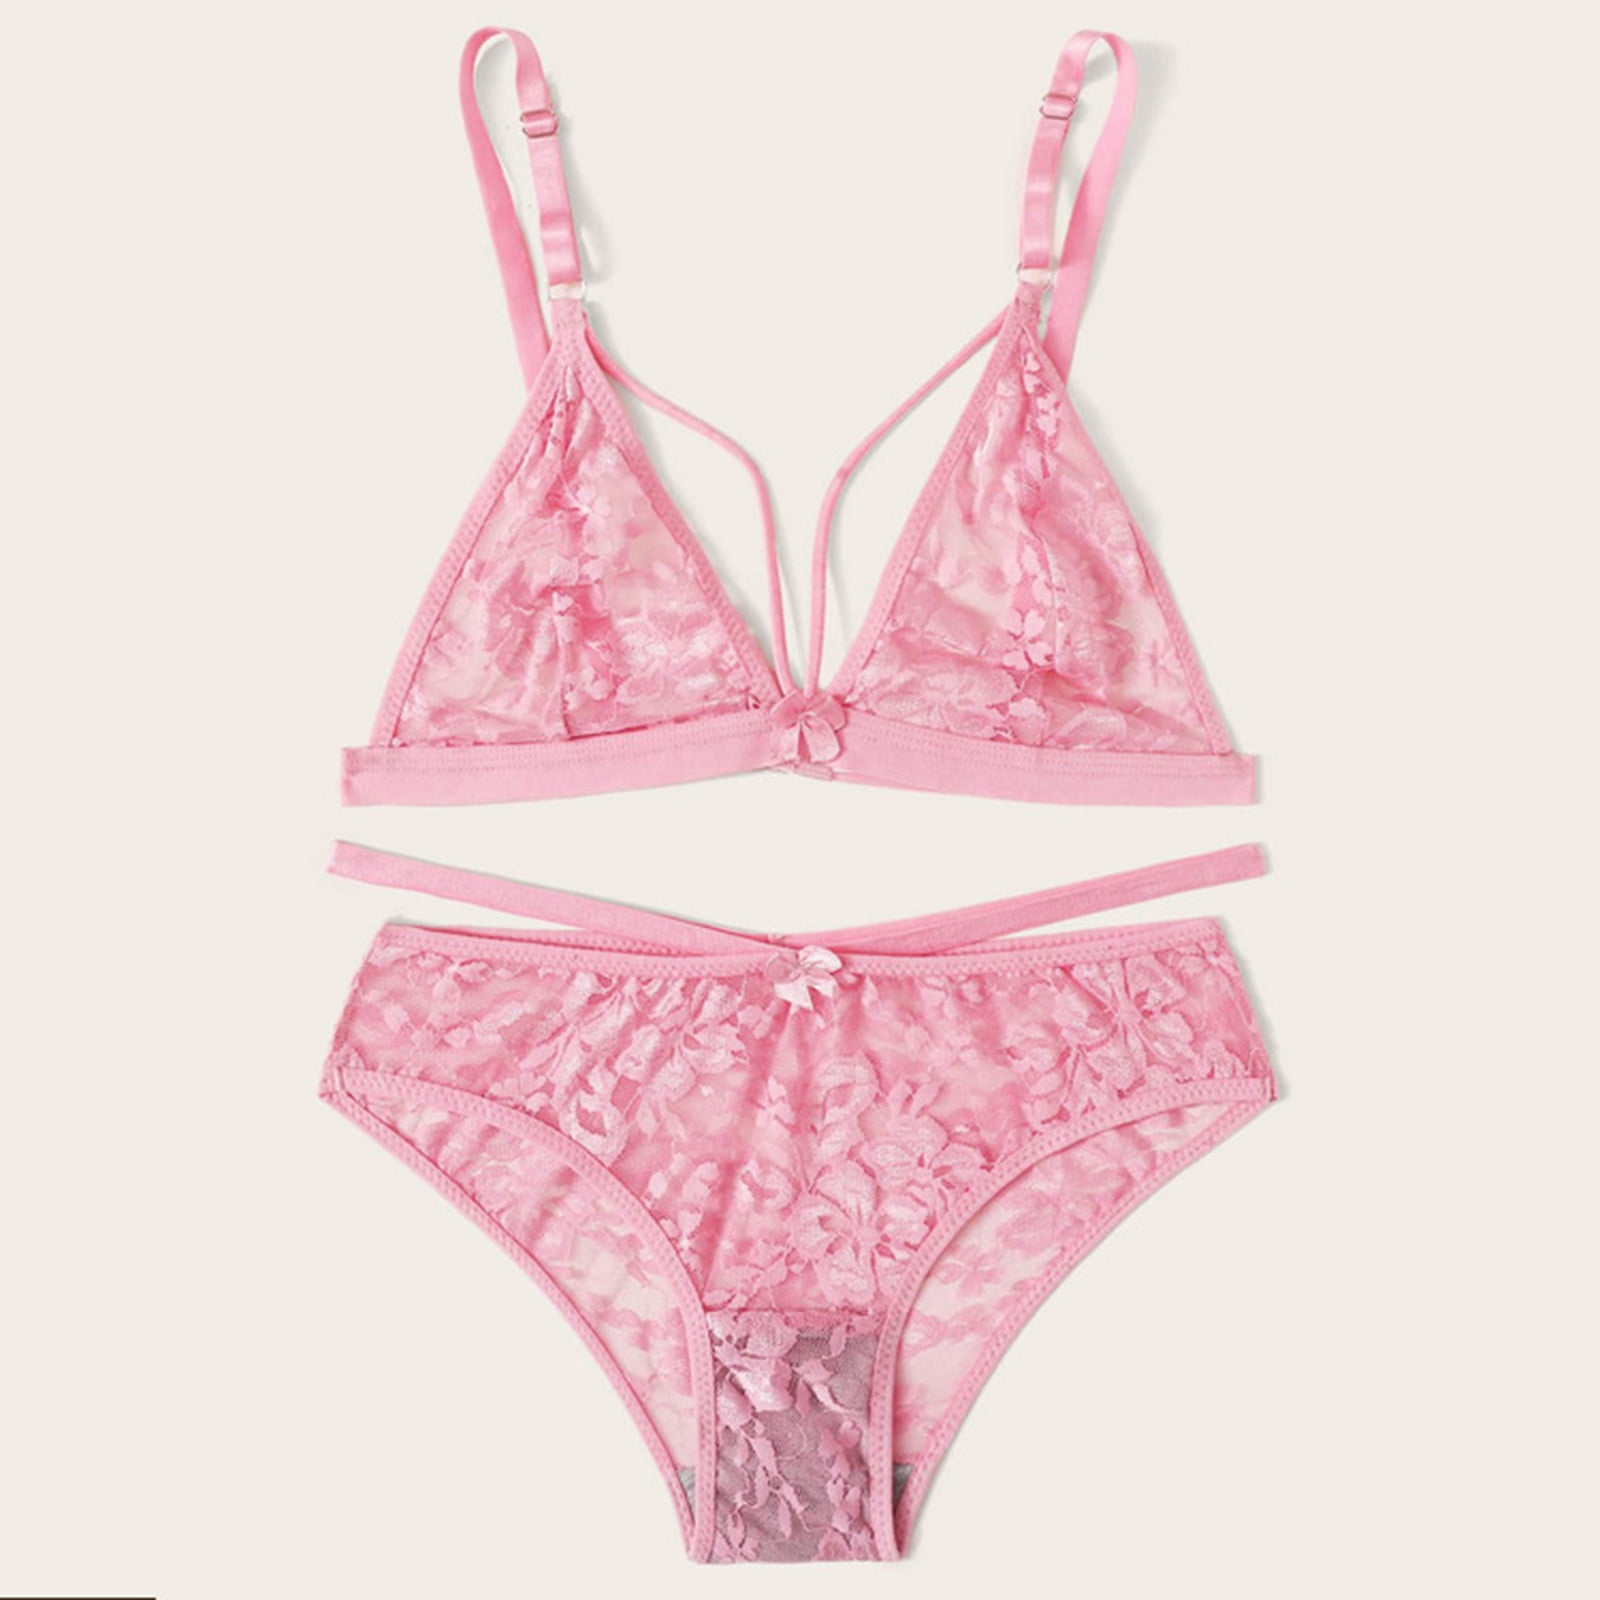 Matching Bra And Panty Sets,Women's Lace 2 Piece Lingerie Set Bralette Strappy  Bra and Panty Set Underwear Negligee(S,Pink) 